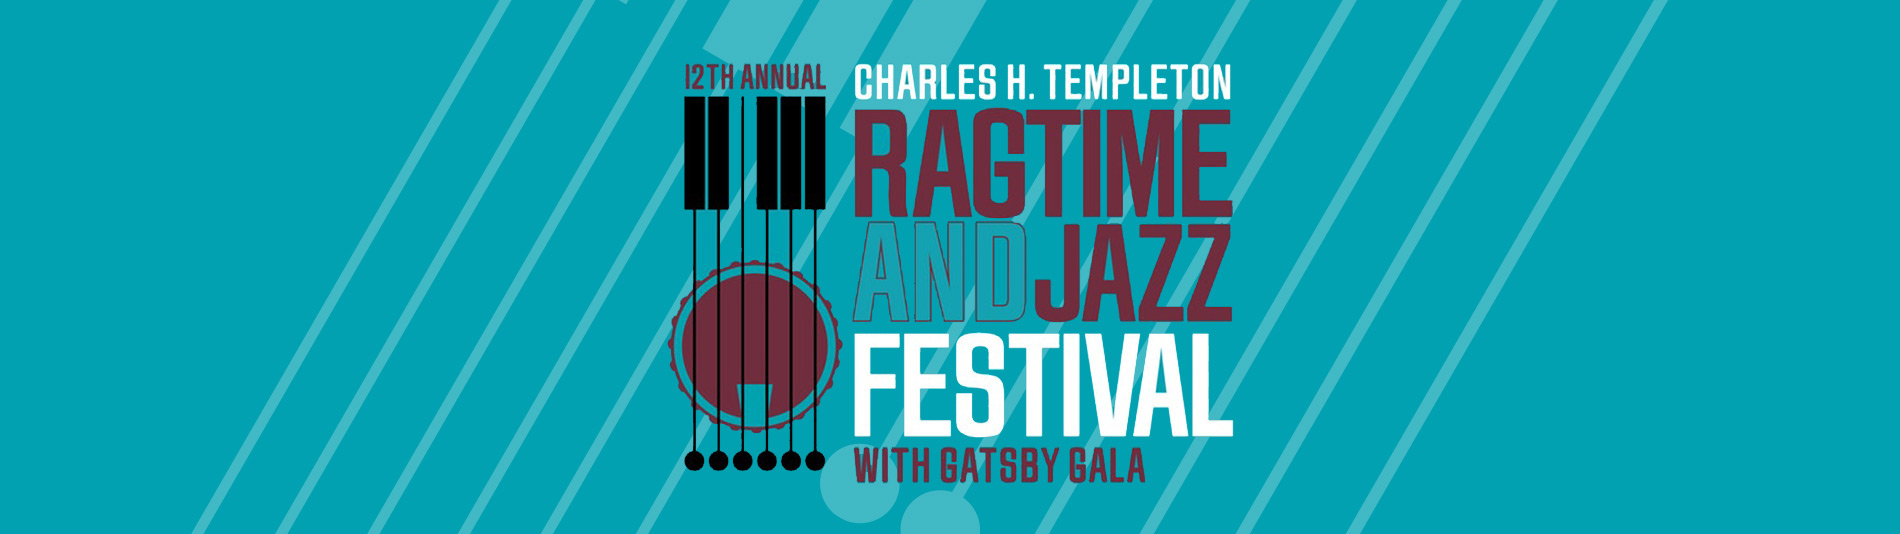 Ragtime and Jazz Festival banner